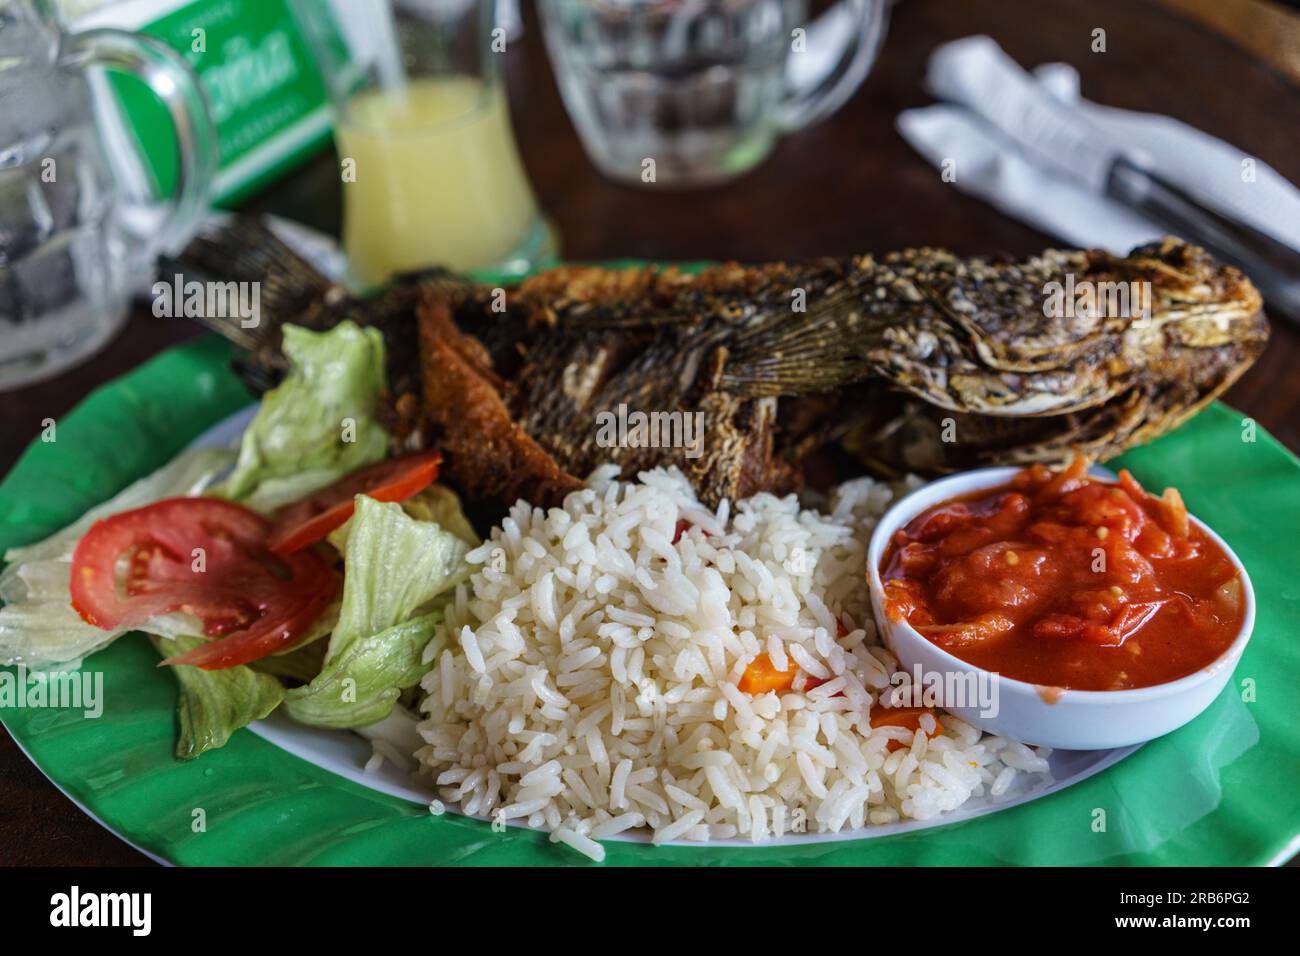 A fried guapote on a plate with tomatoes both fresh and stewed and rice.  This fish is a Jaguar Cichlid (Parachromis managuensis). Stock Photo